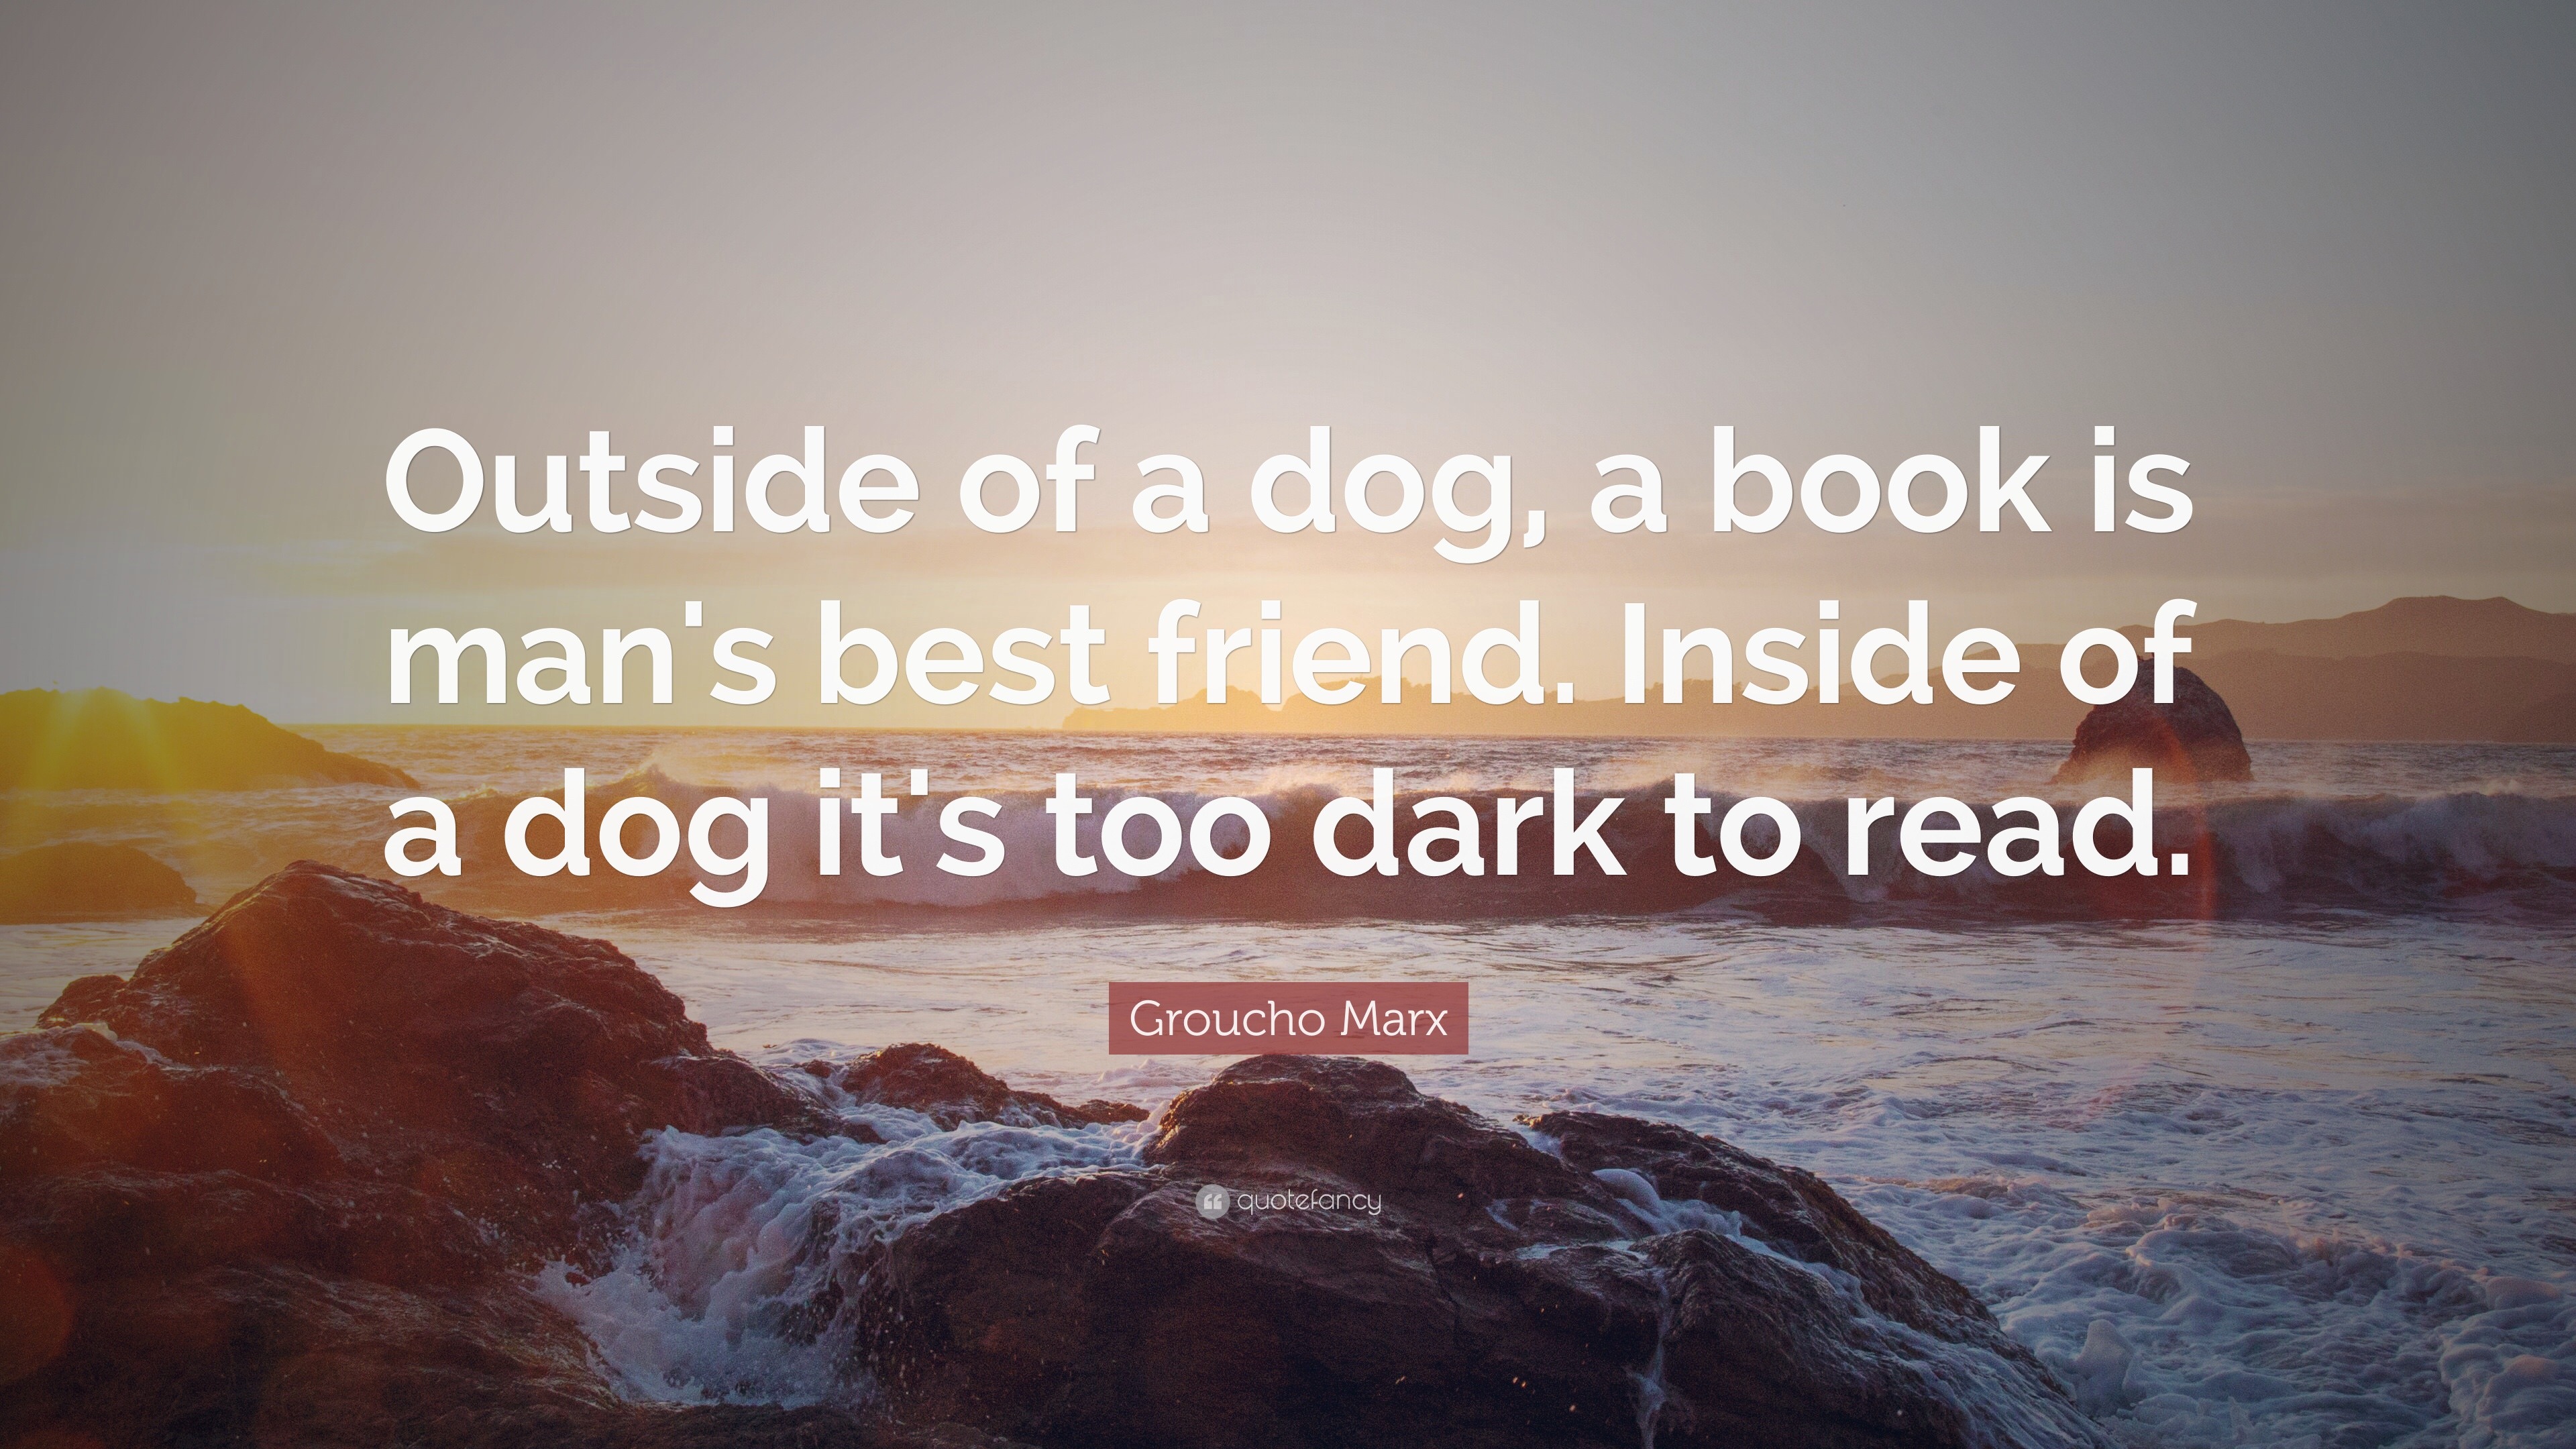 Groucho Marx Quote: “Outside of a dog, a book is man's best friend